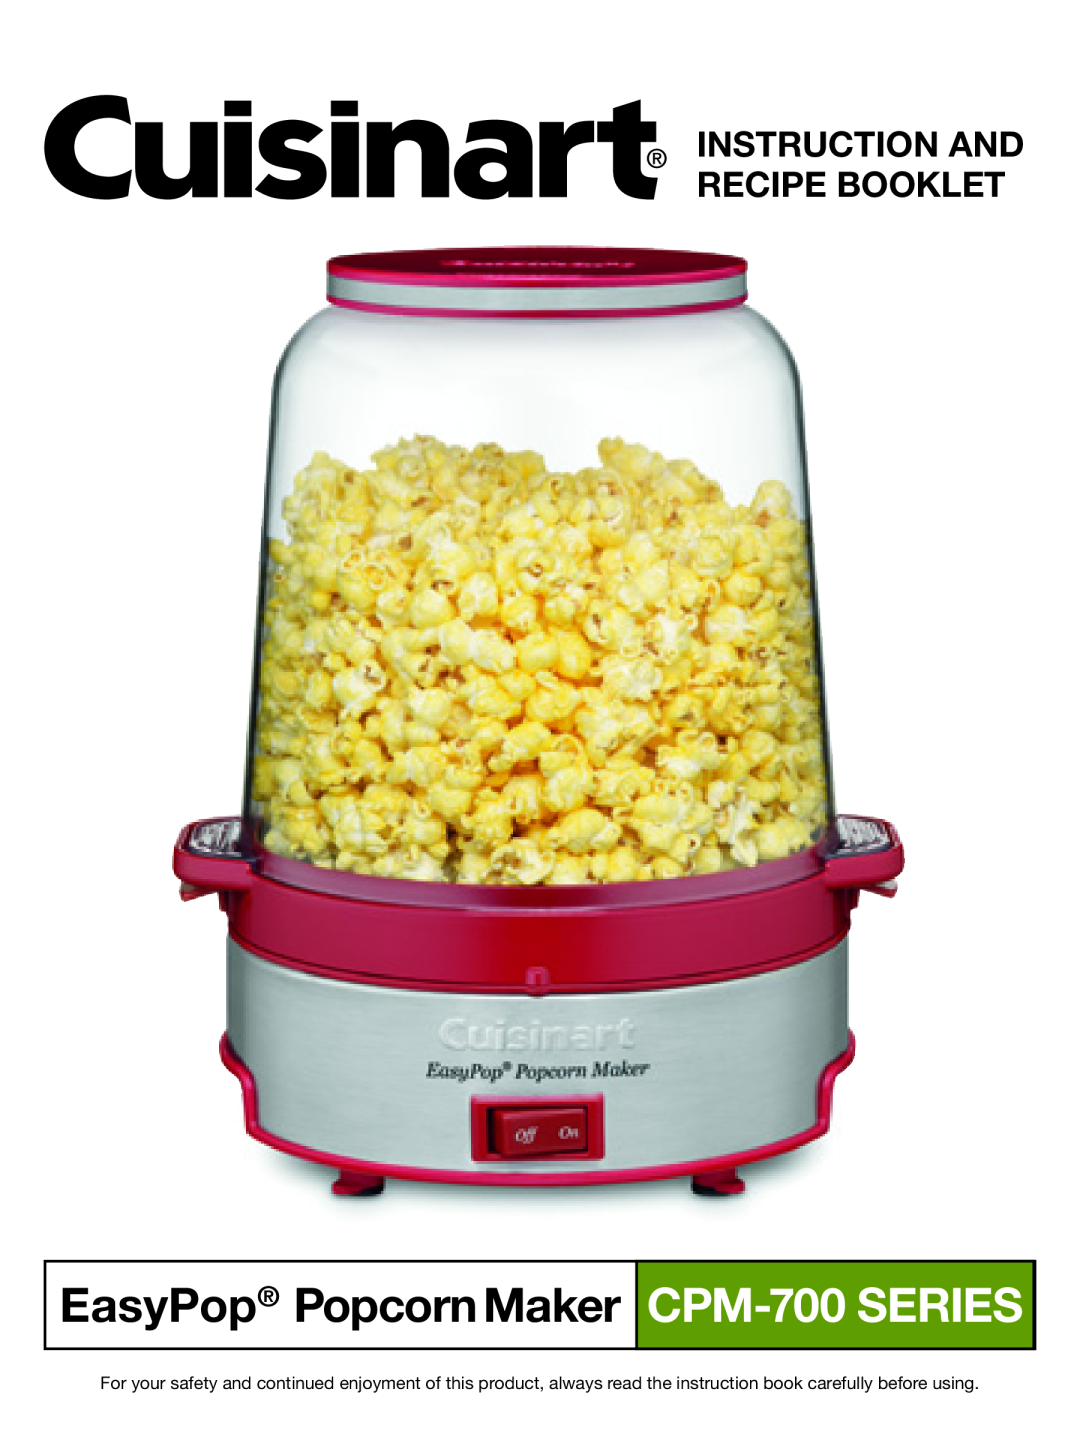 Cuisinart CPM-700 Series manual Instruction And Recipe Booklet, EasyPop PopcornMaker CPM-700 SERIES 